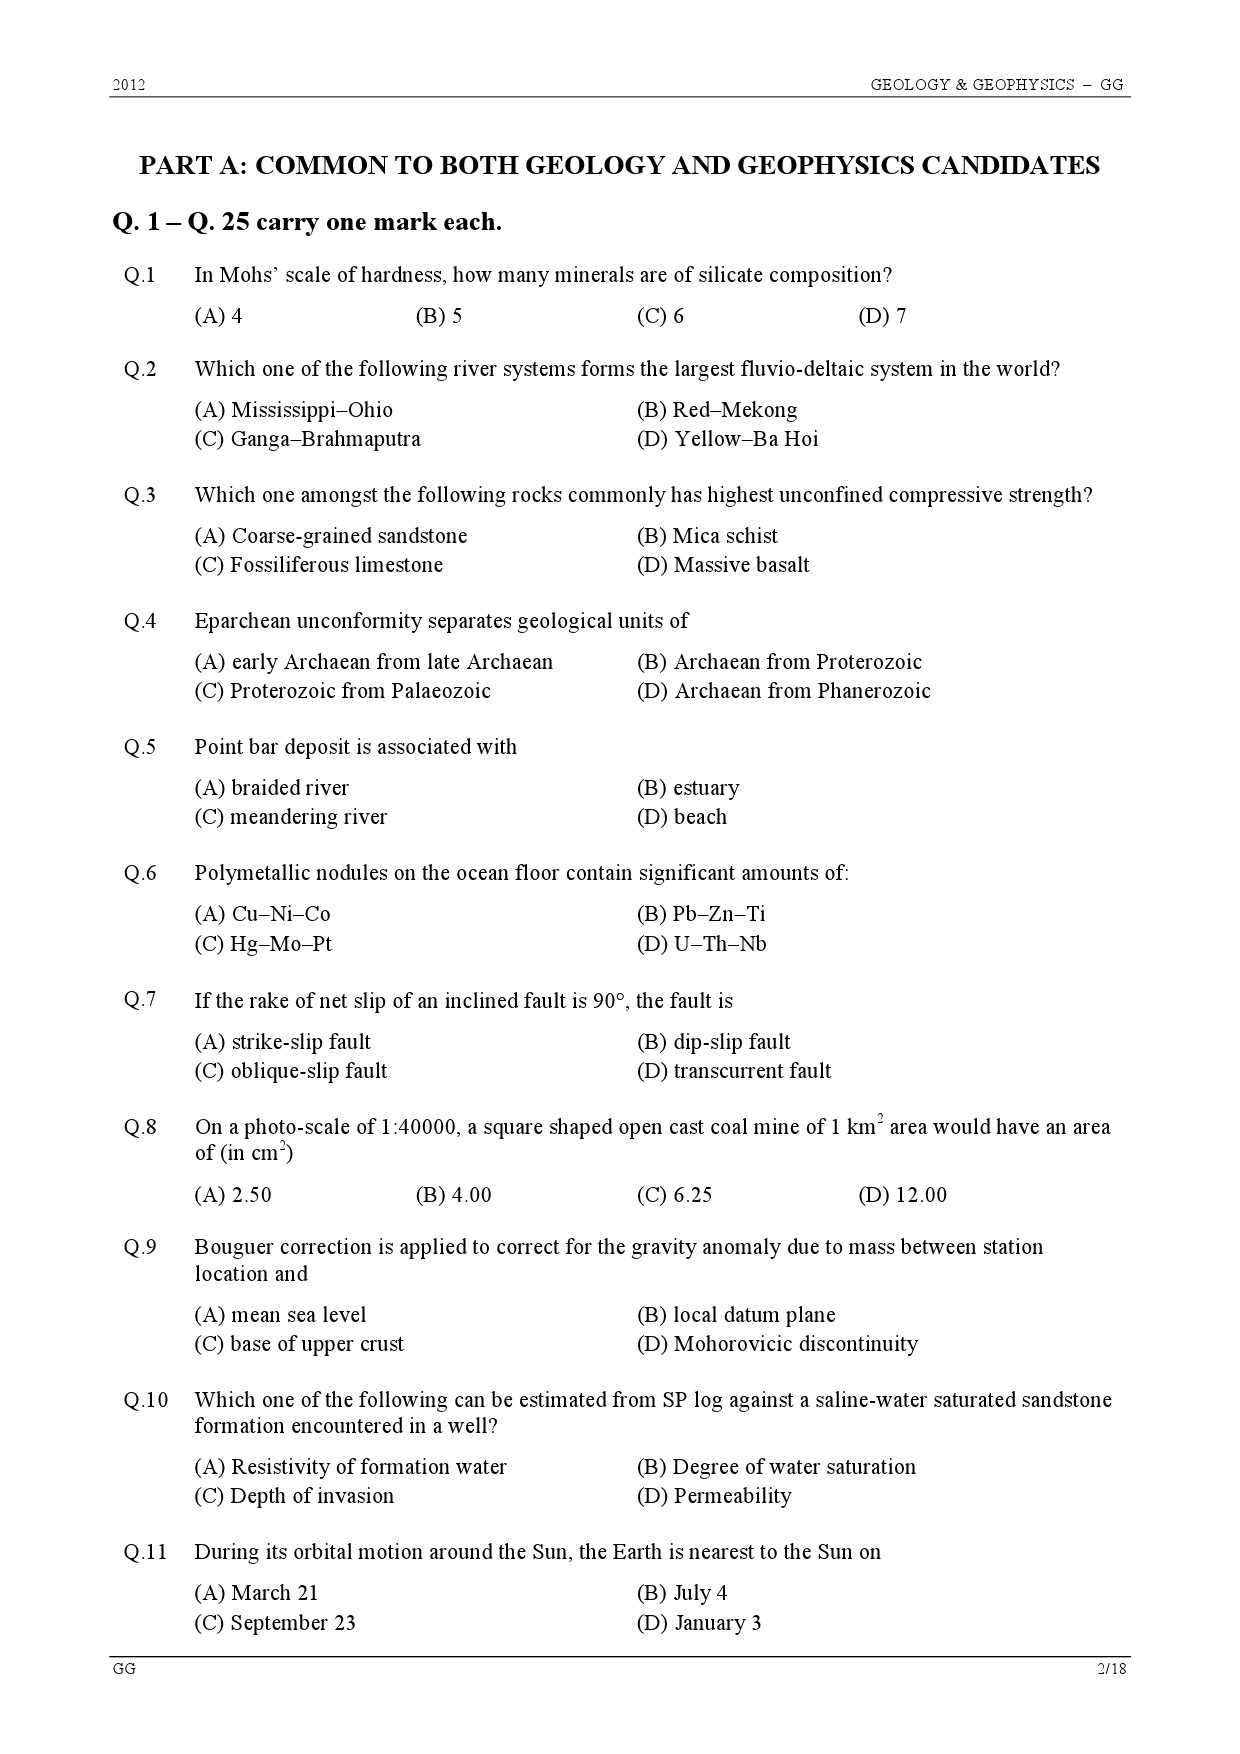 GATE Exam Question Paper 2012 Geology and Geophysics 2